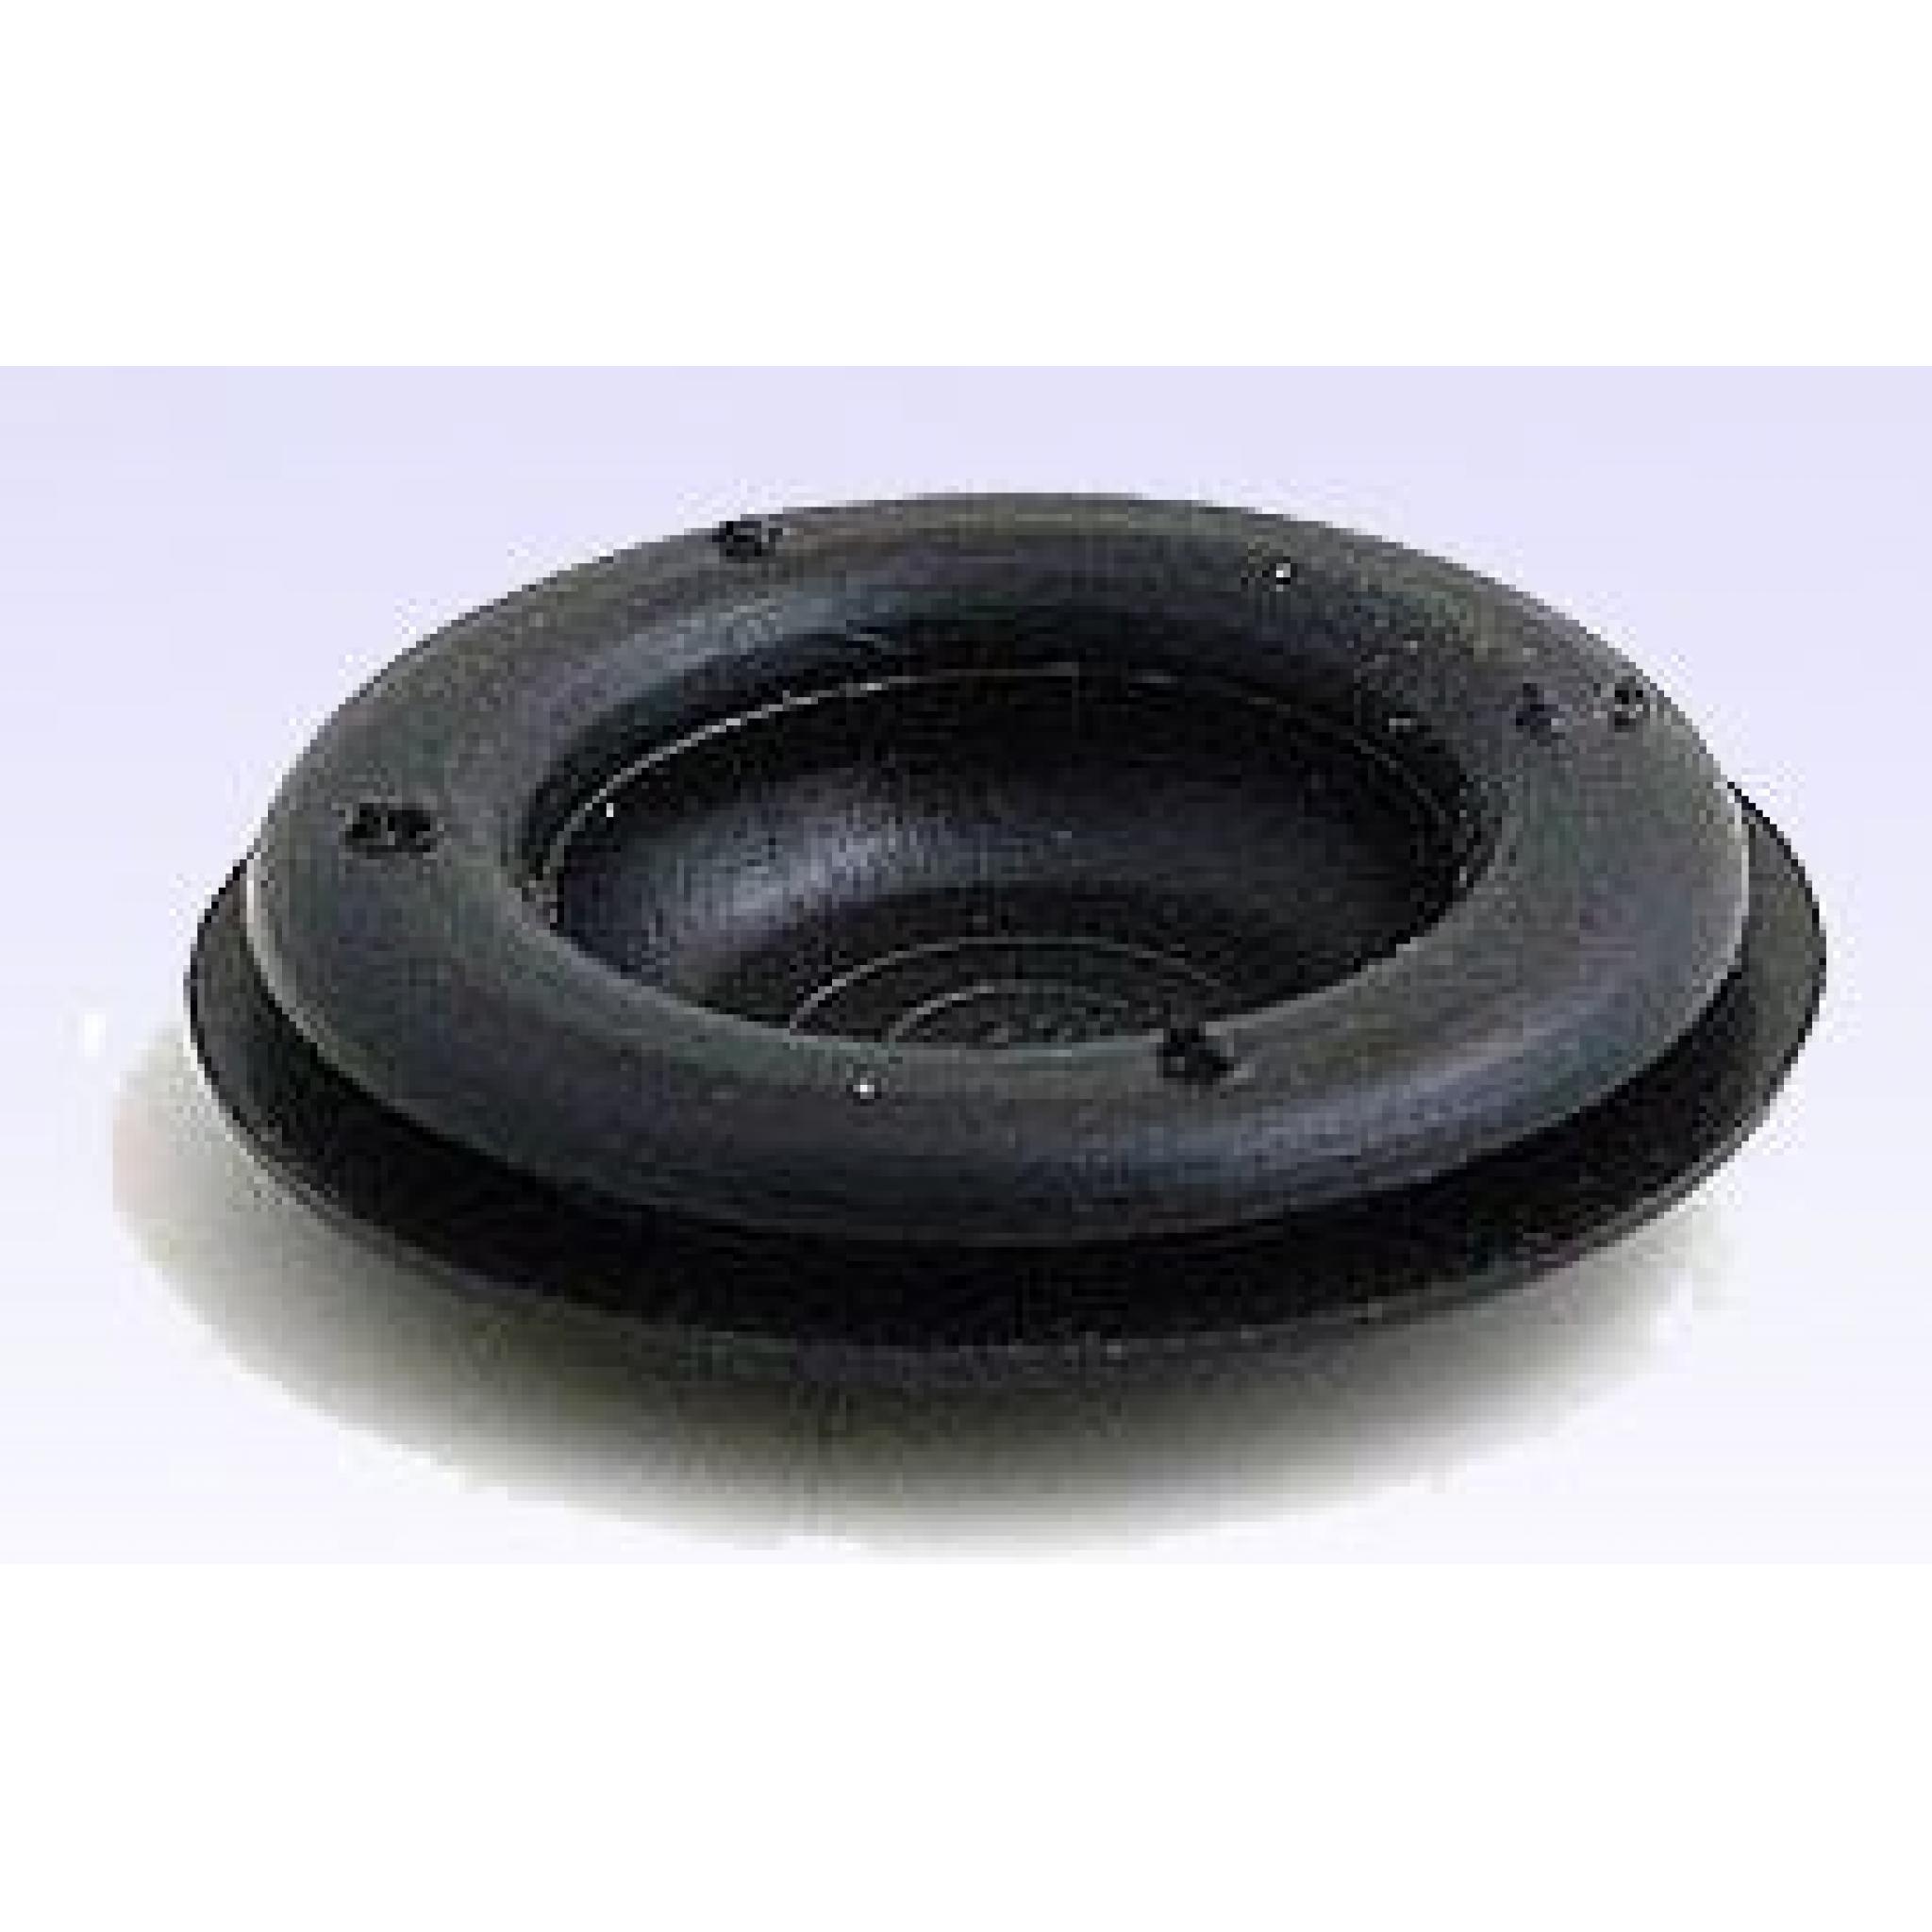 Details about  / Rubber Grommets Blanking Blind Closed Grommet Plugs Bung 6mm 50mm